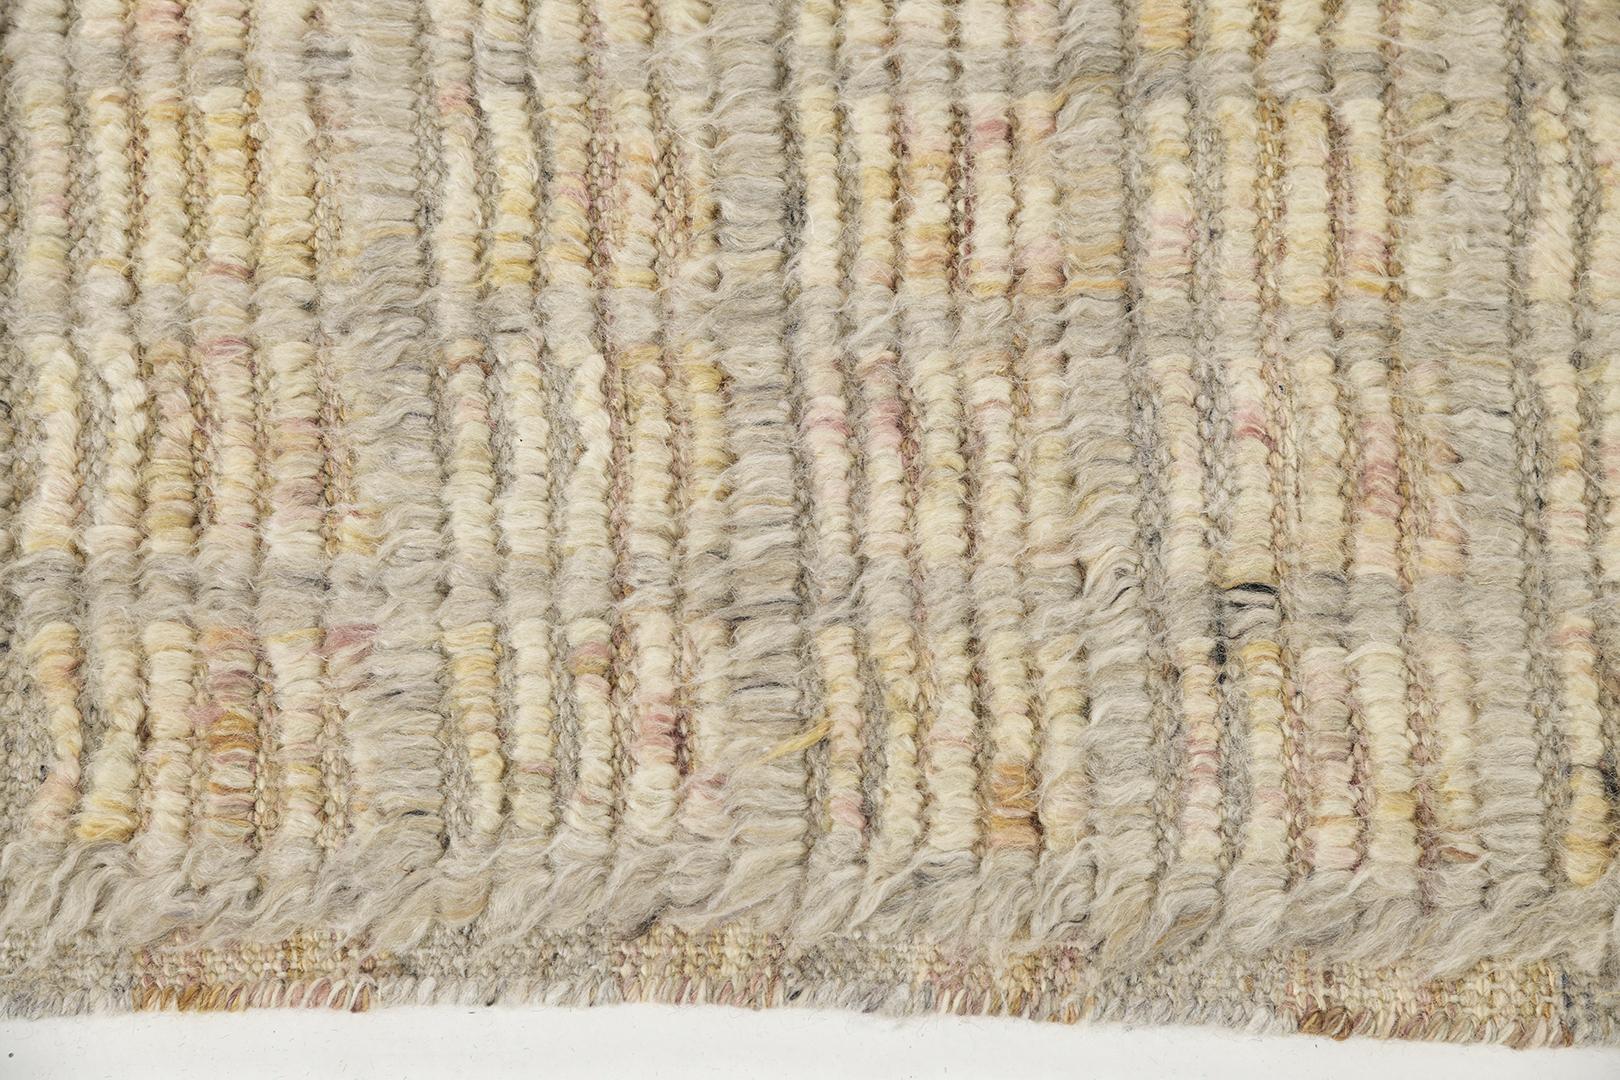 A fashionable handwoven wool pile and ribbed texture from an Atlas Collection can transform your spaces into contemporary settings and some modern ambiance with class and sophistication. Neutral tones are coordinated as well as the pattern that